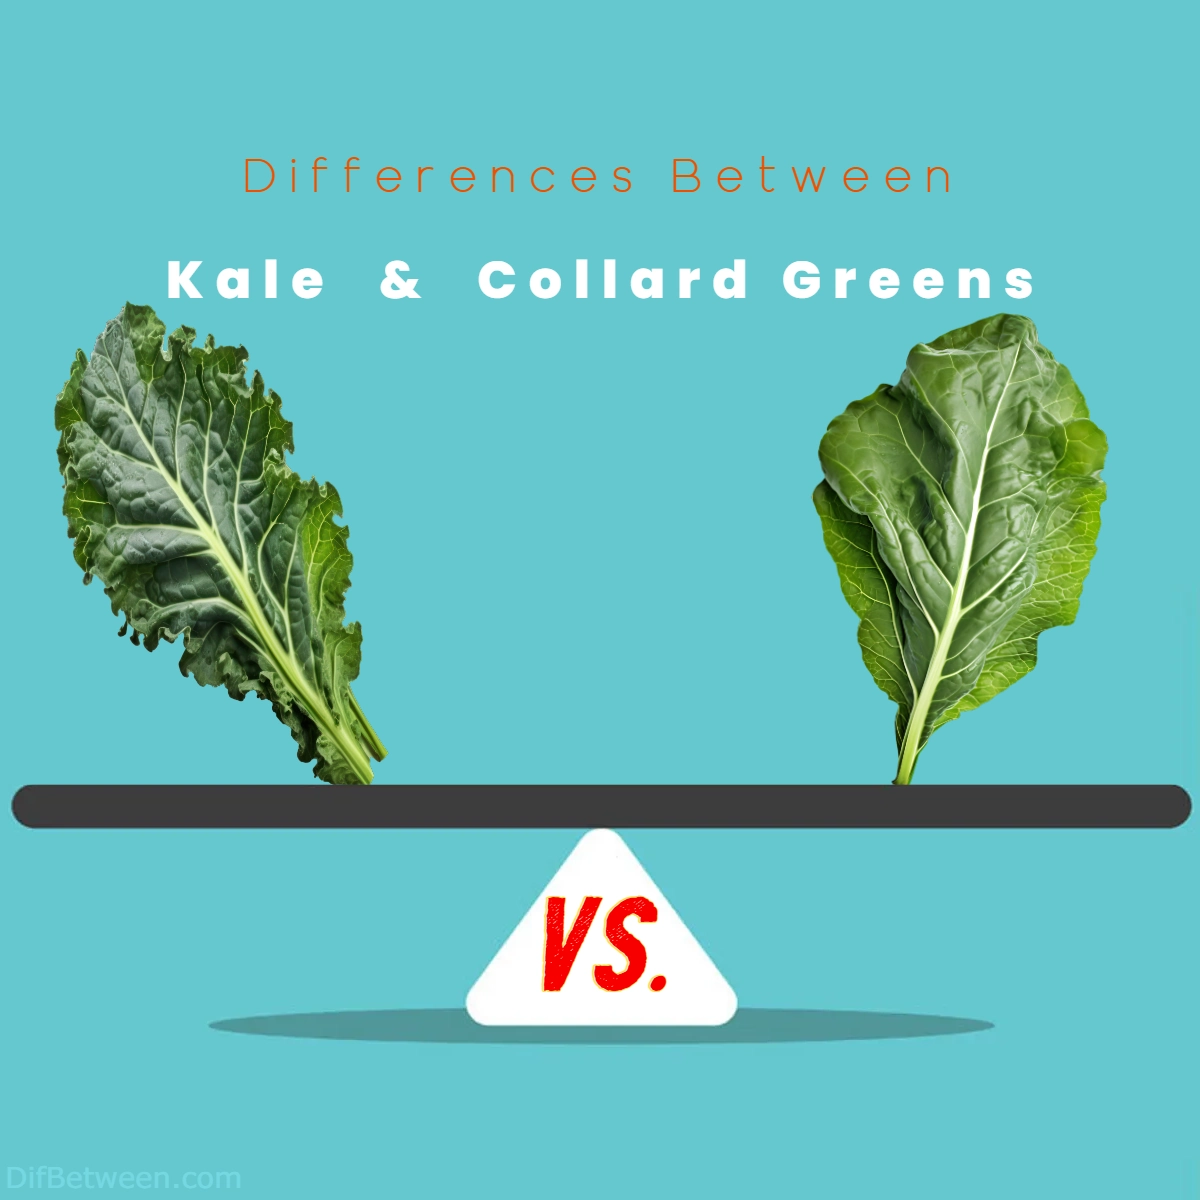 Difference Between Kale and Collard Greens